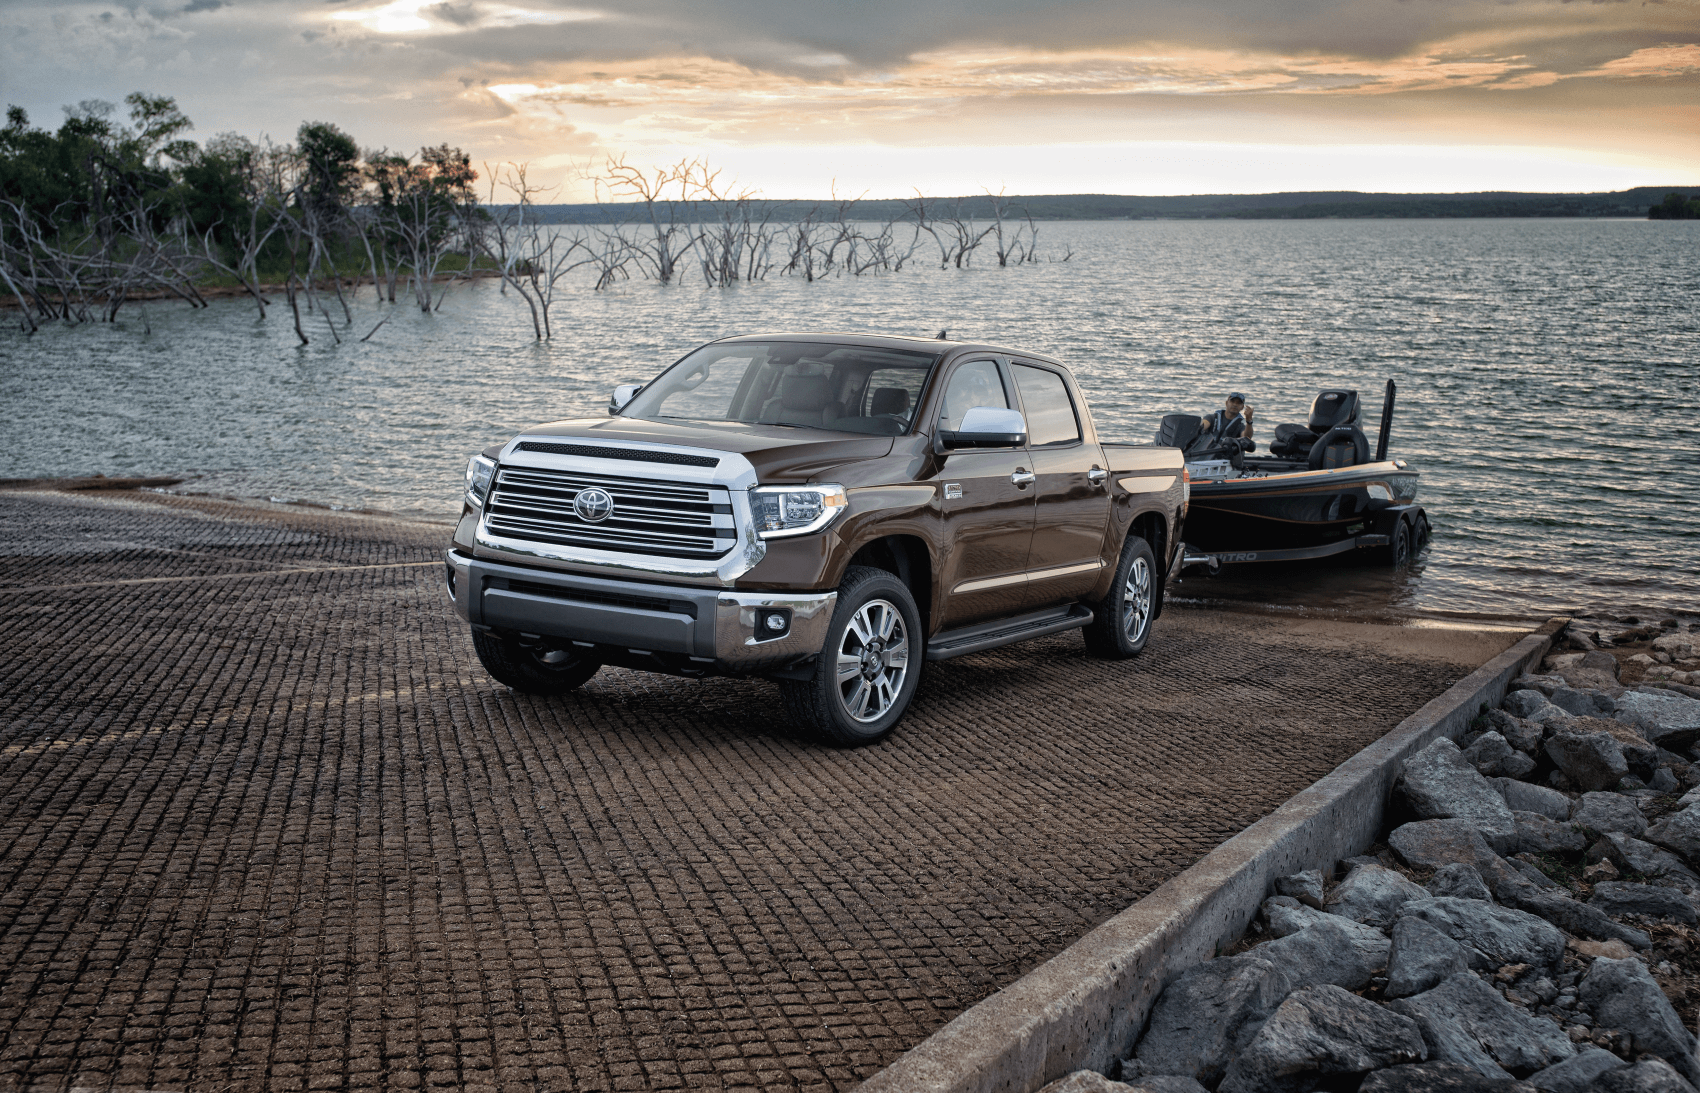 2020 Toyota Tundra Towing Boat